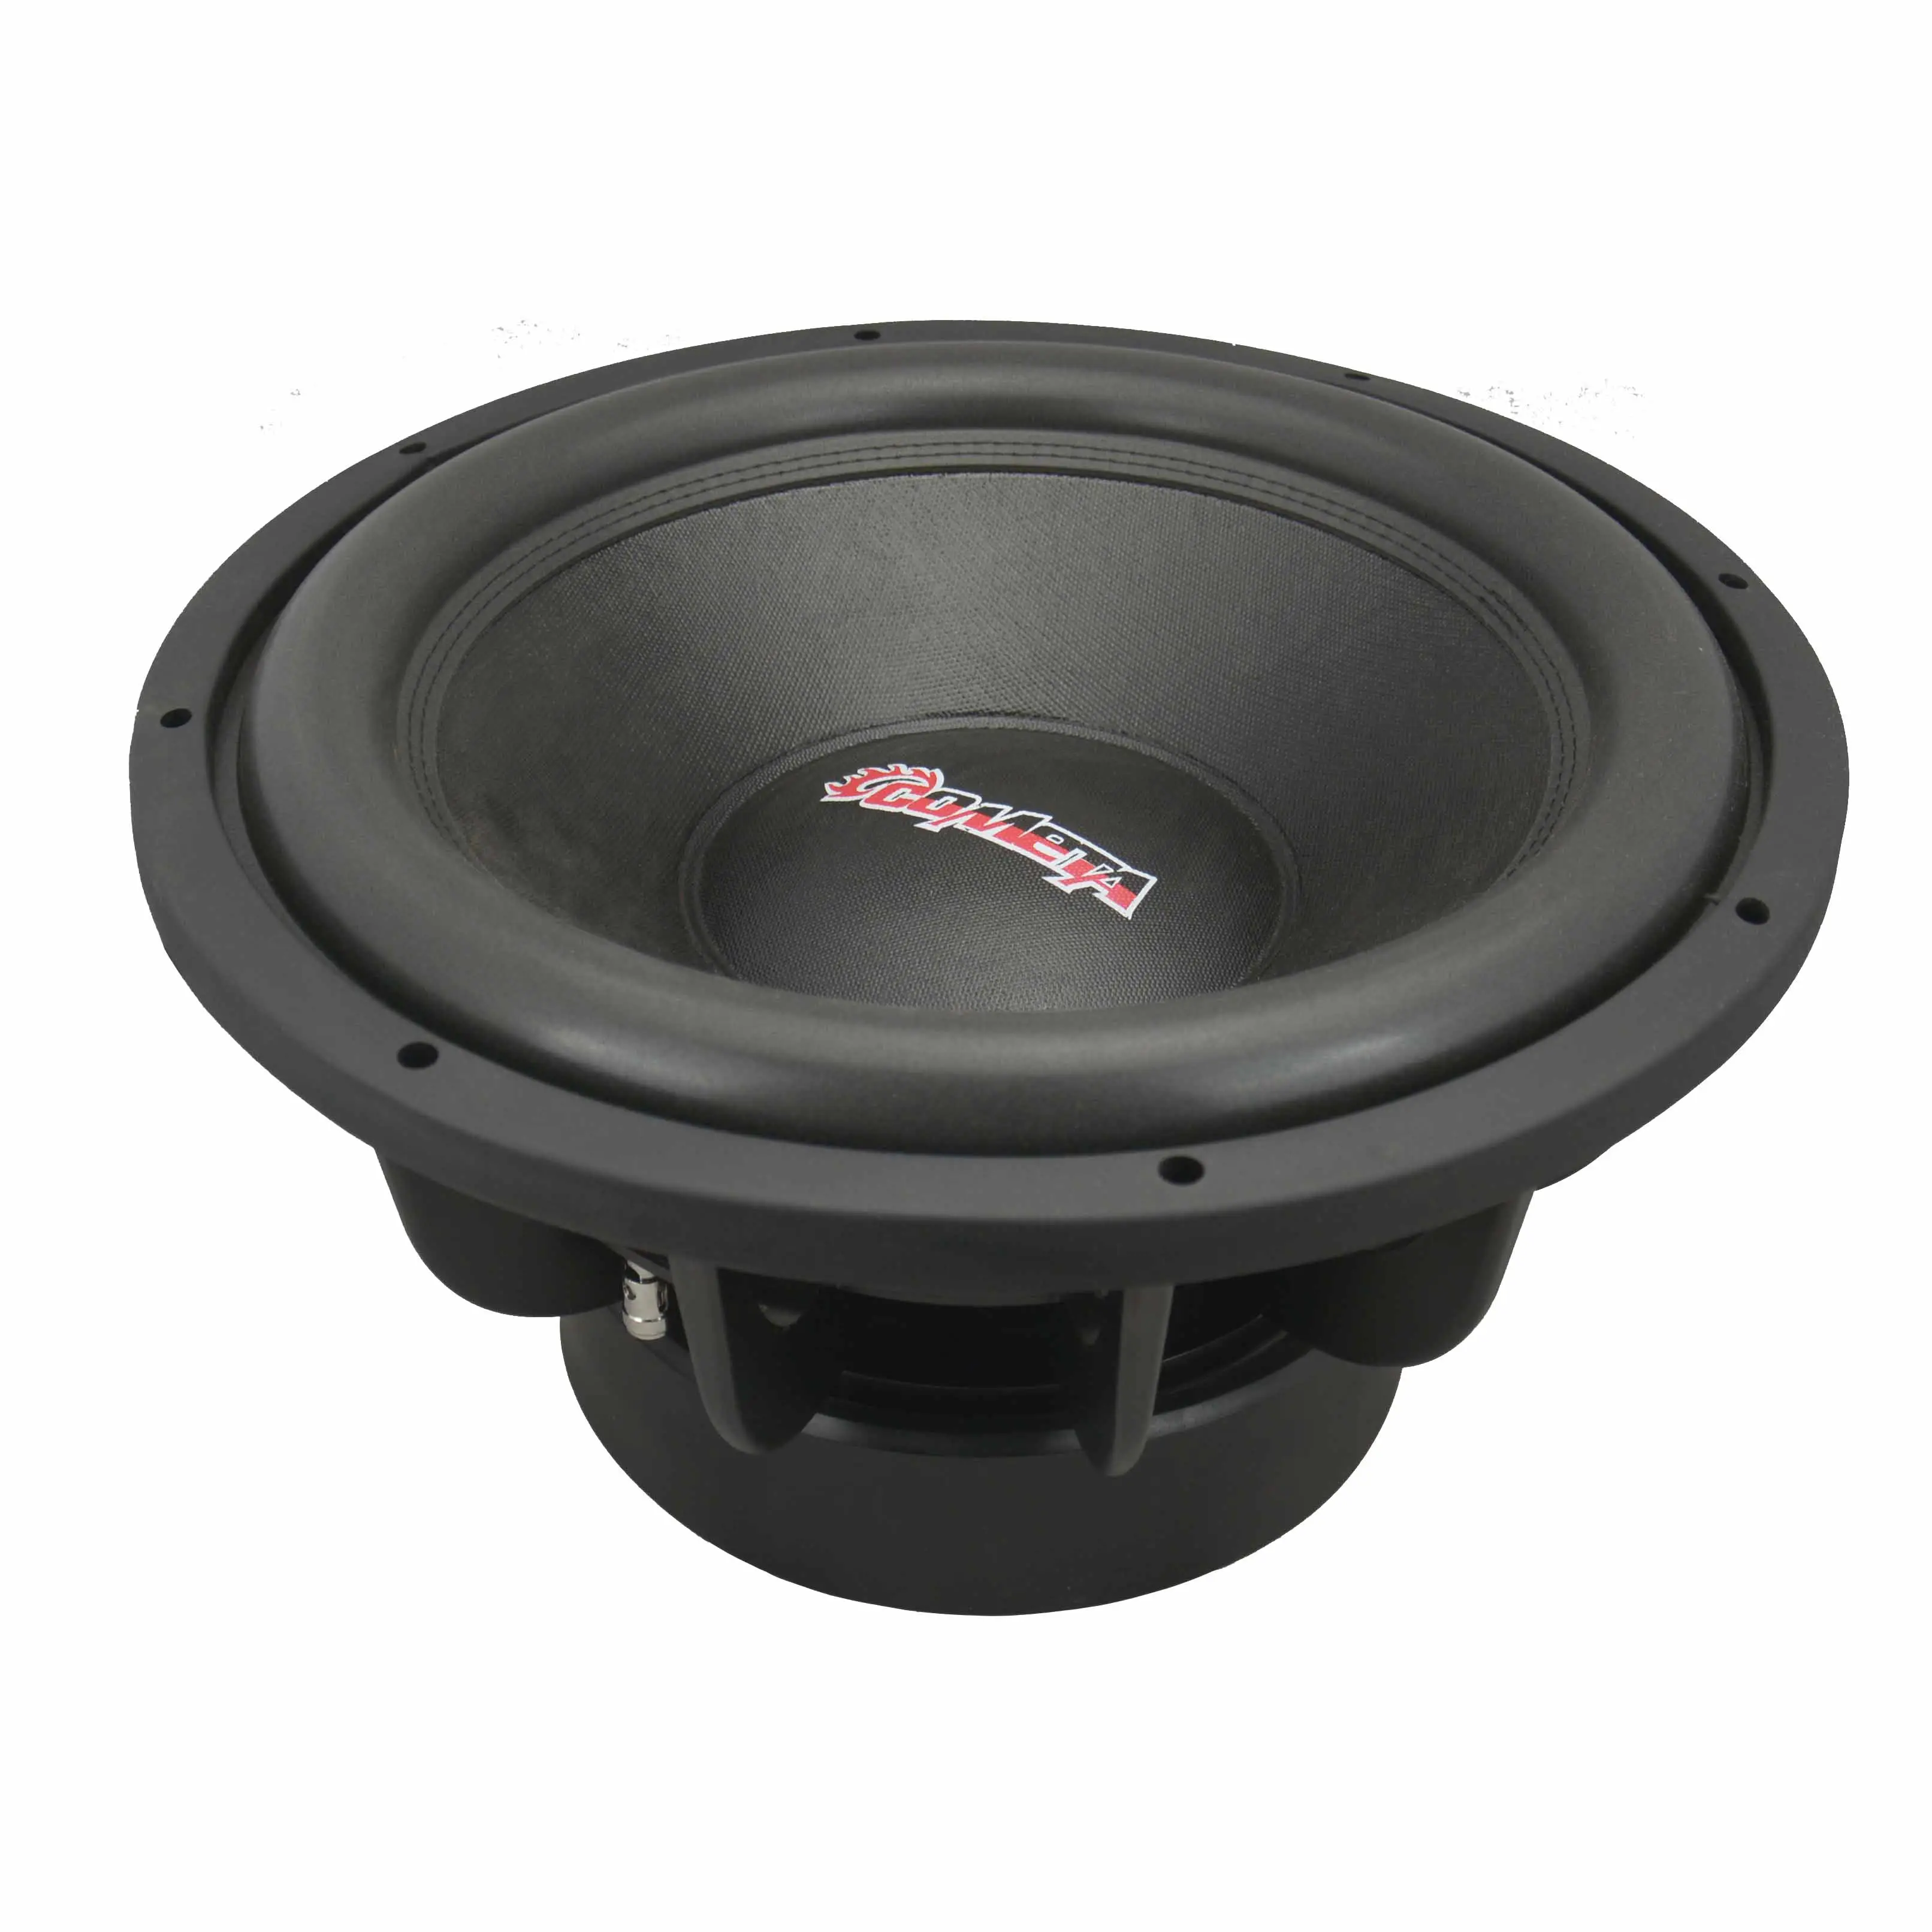 Hanson OP-D CT-1520 Hot Sale 8 inches Active Car Subwoofer Oem China 12 inch SKD Subwoofer Speaker Build 16 years